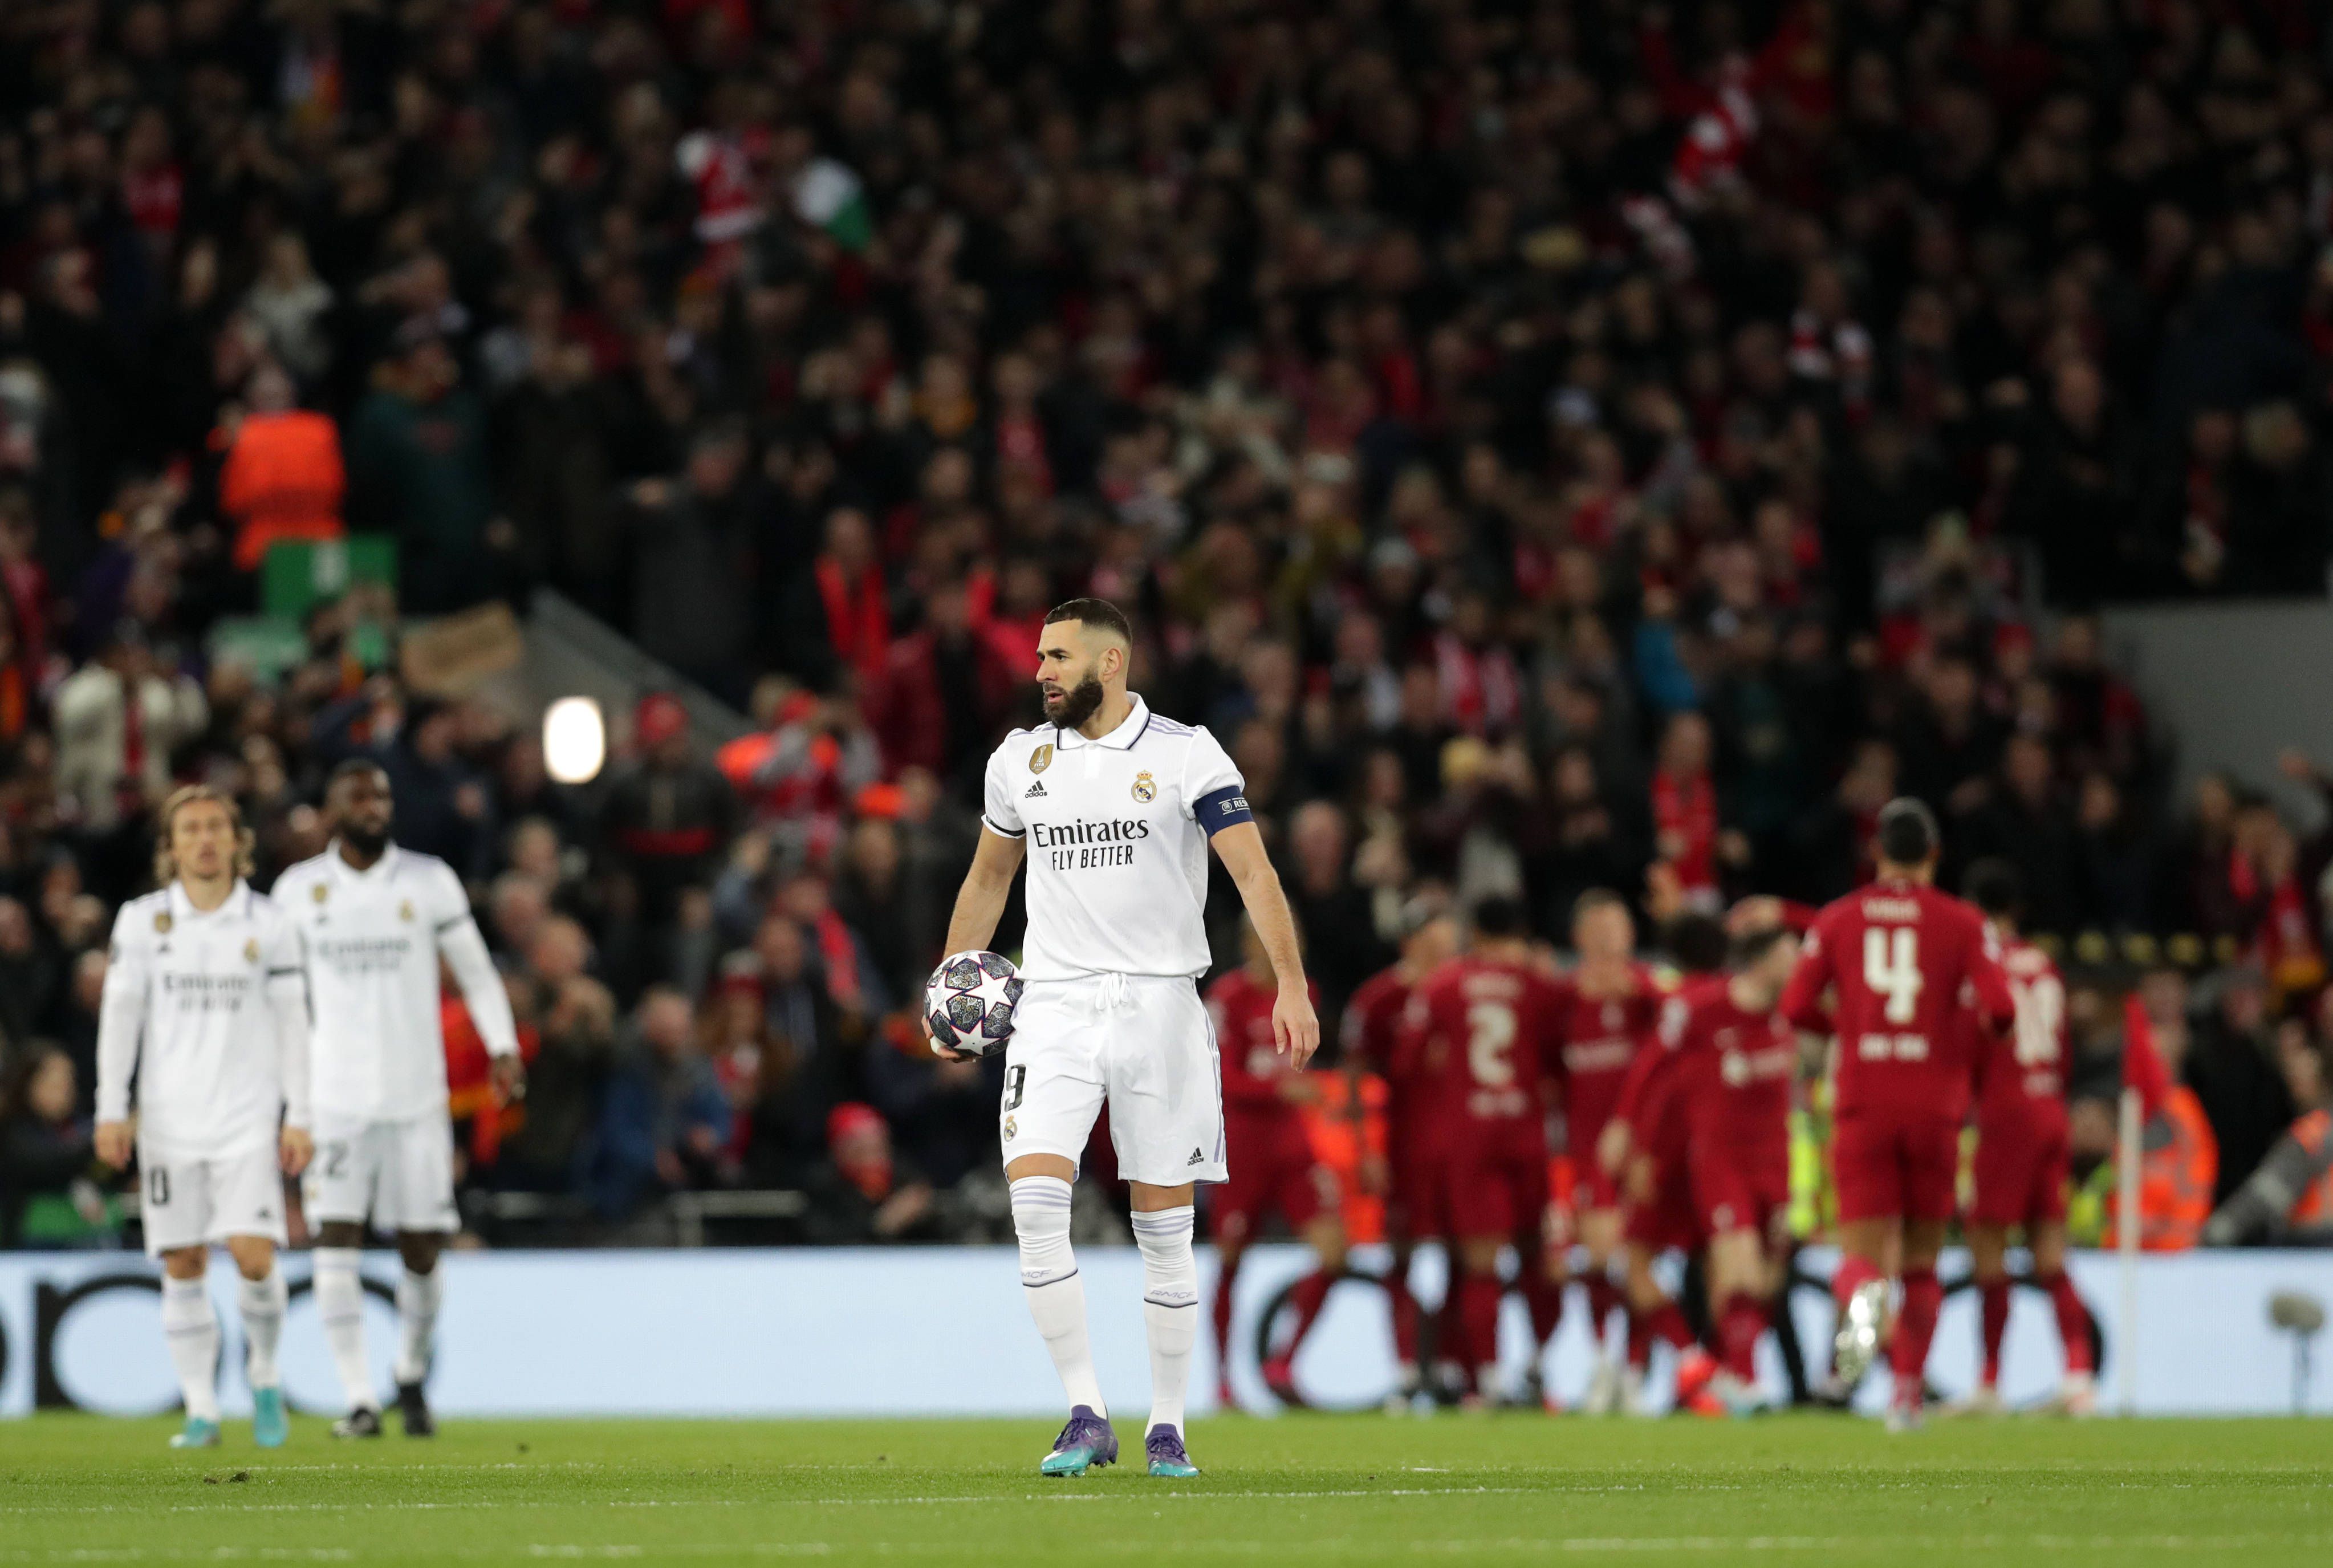 Real Madrid fought back from two-goals down to defeat Liverpool